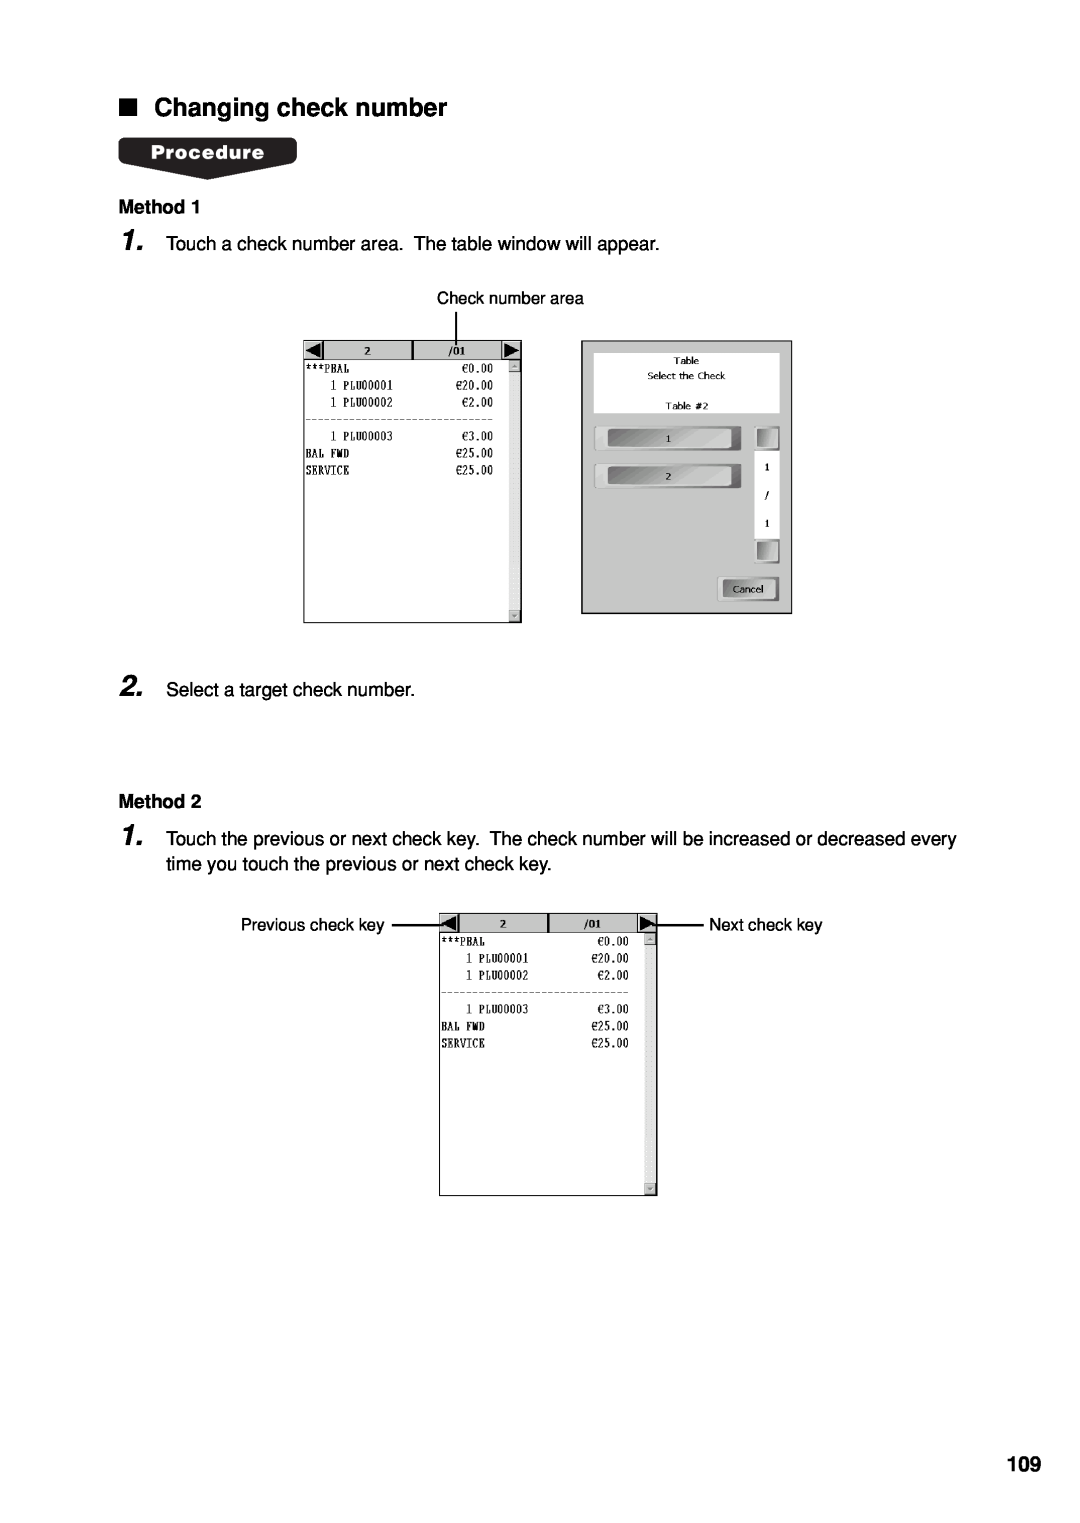 Sharp UP-X300 instruction manual Changing check number, Method 